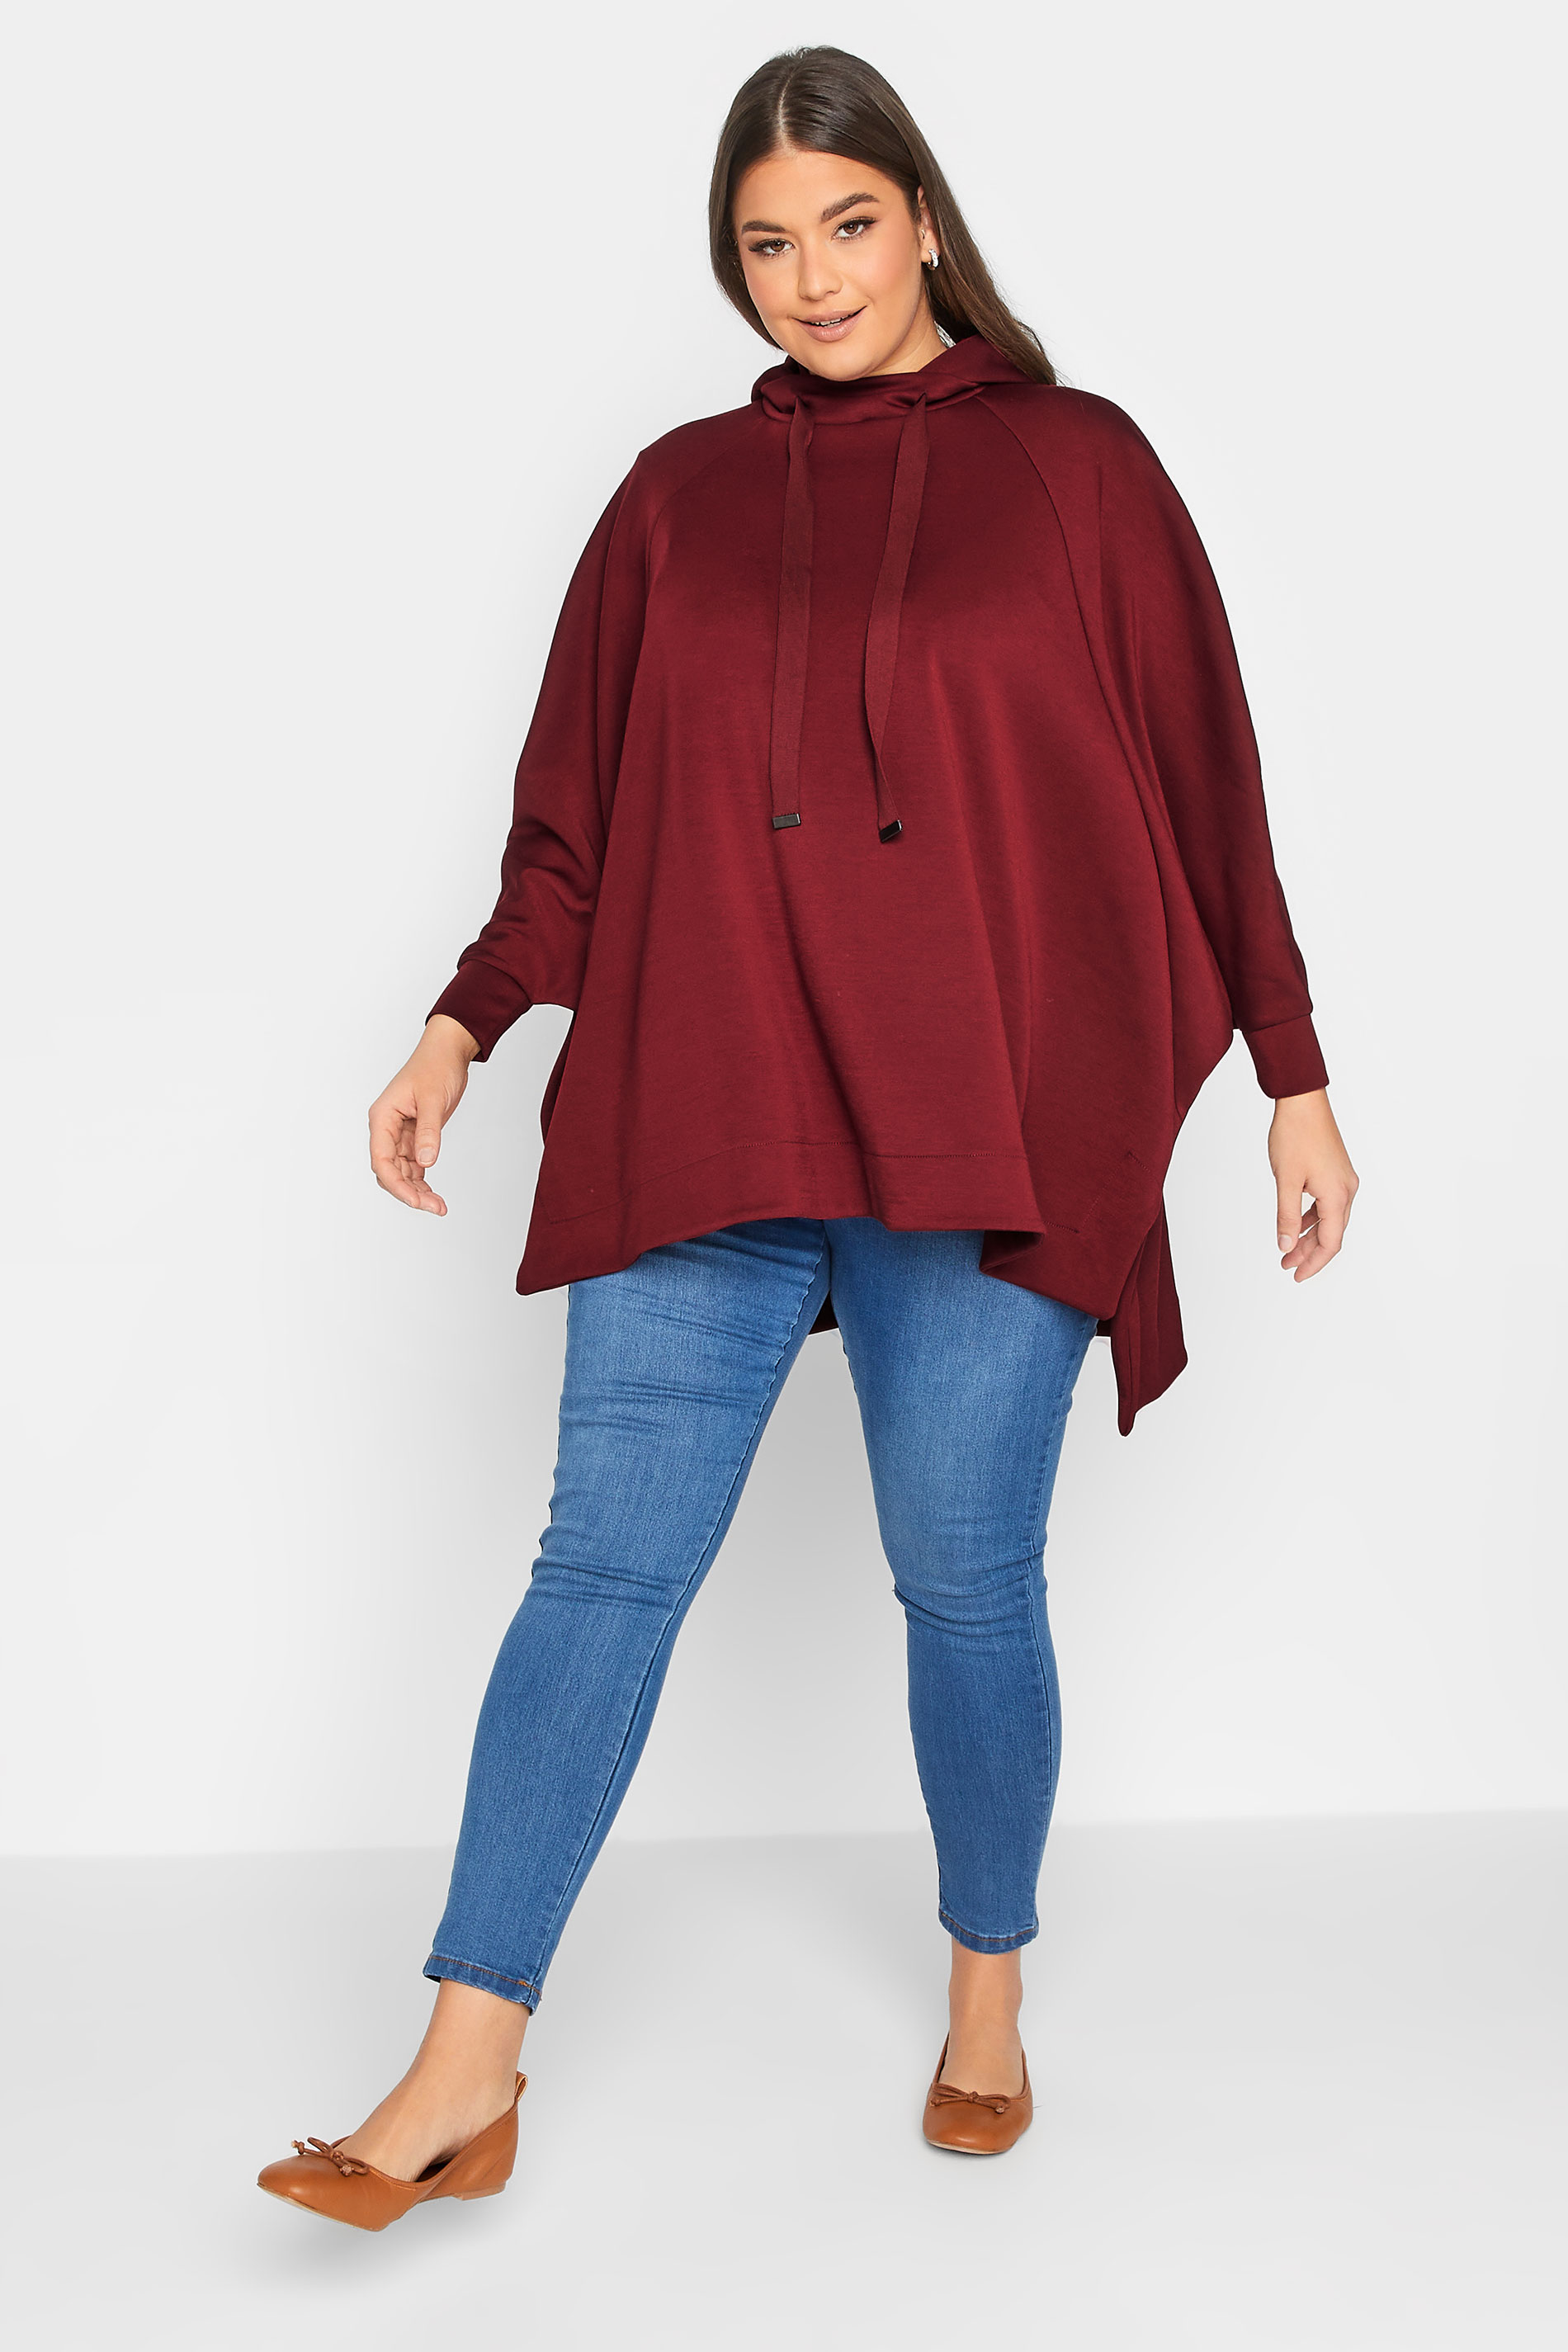 YOURS LUXURY Plus Size Red Tie Detail Oversized Hoodie | Yours Clothing 2